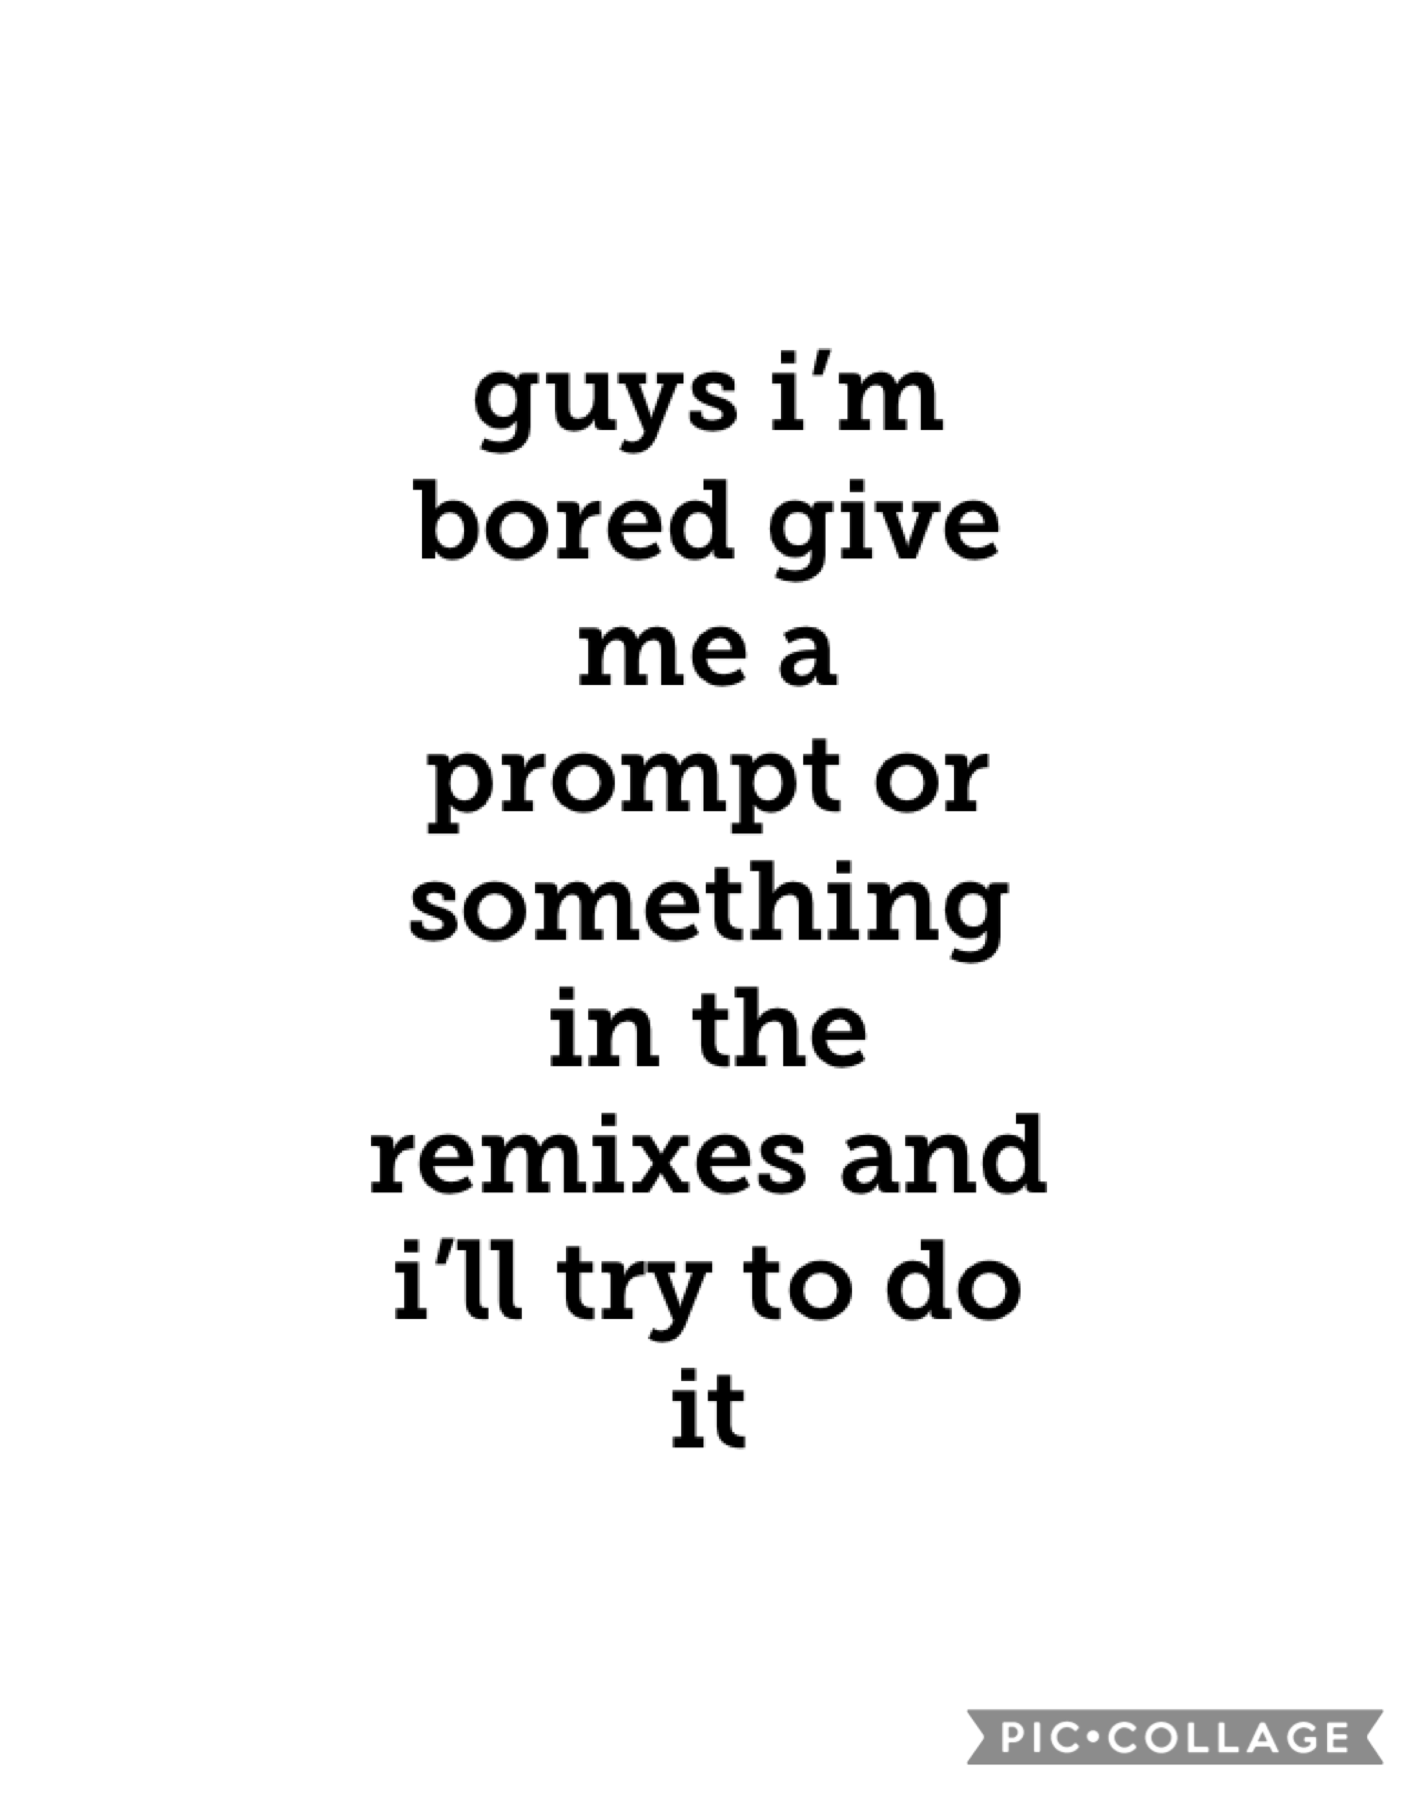 i’m so bored give me a prompt, or like something you want me to do or answer in the remixes